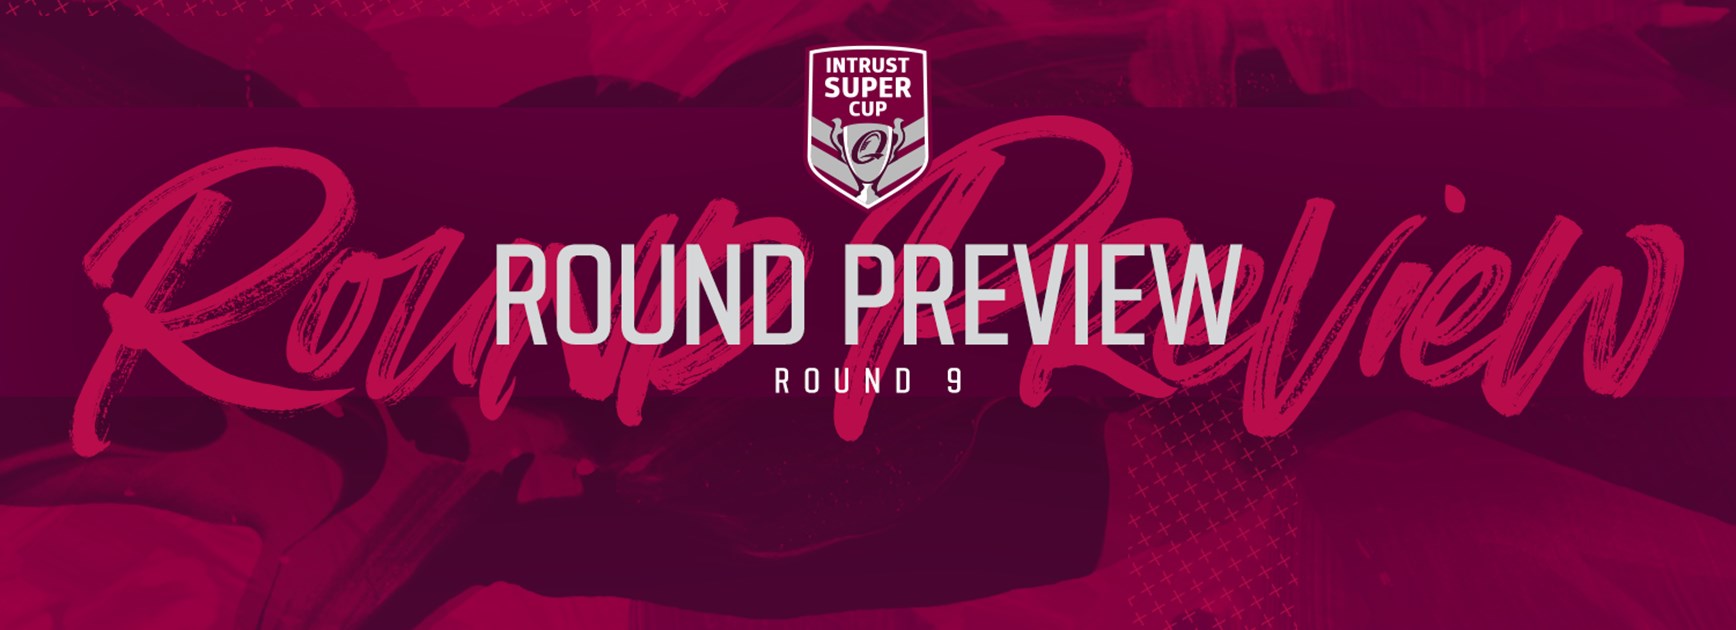 Intrust Super Cup Round 9 preview